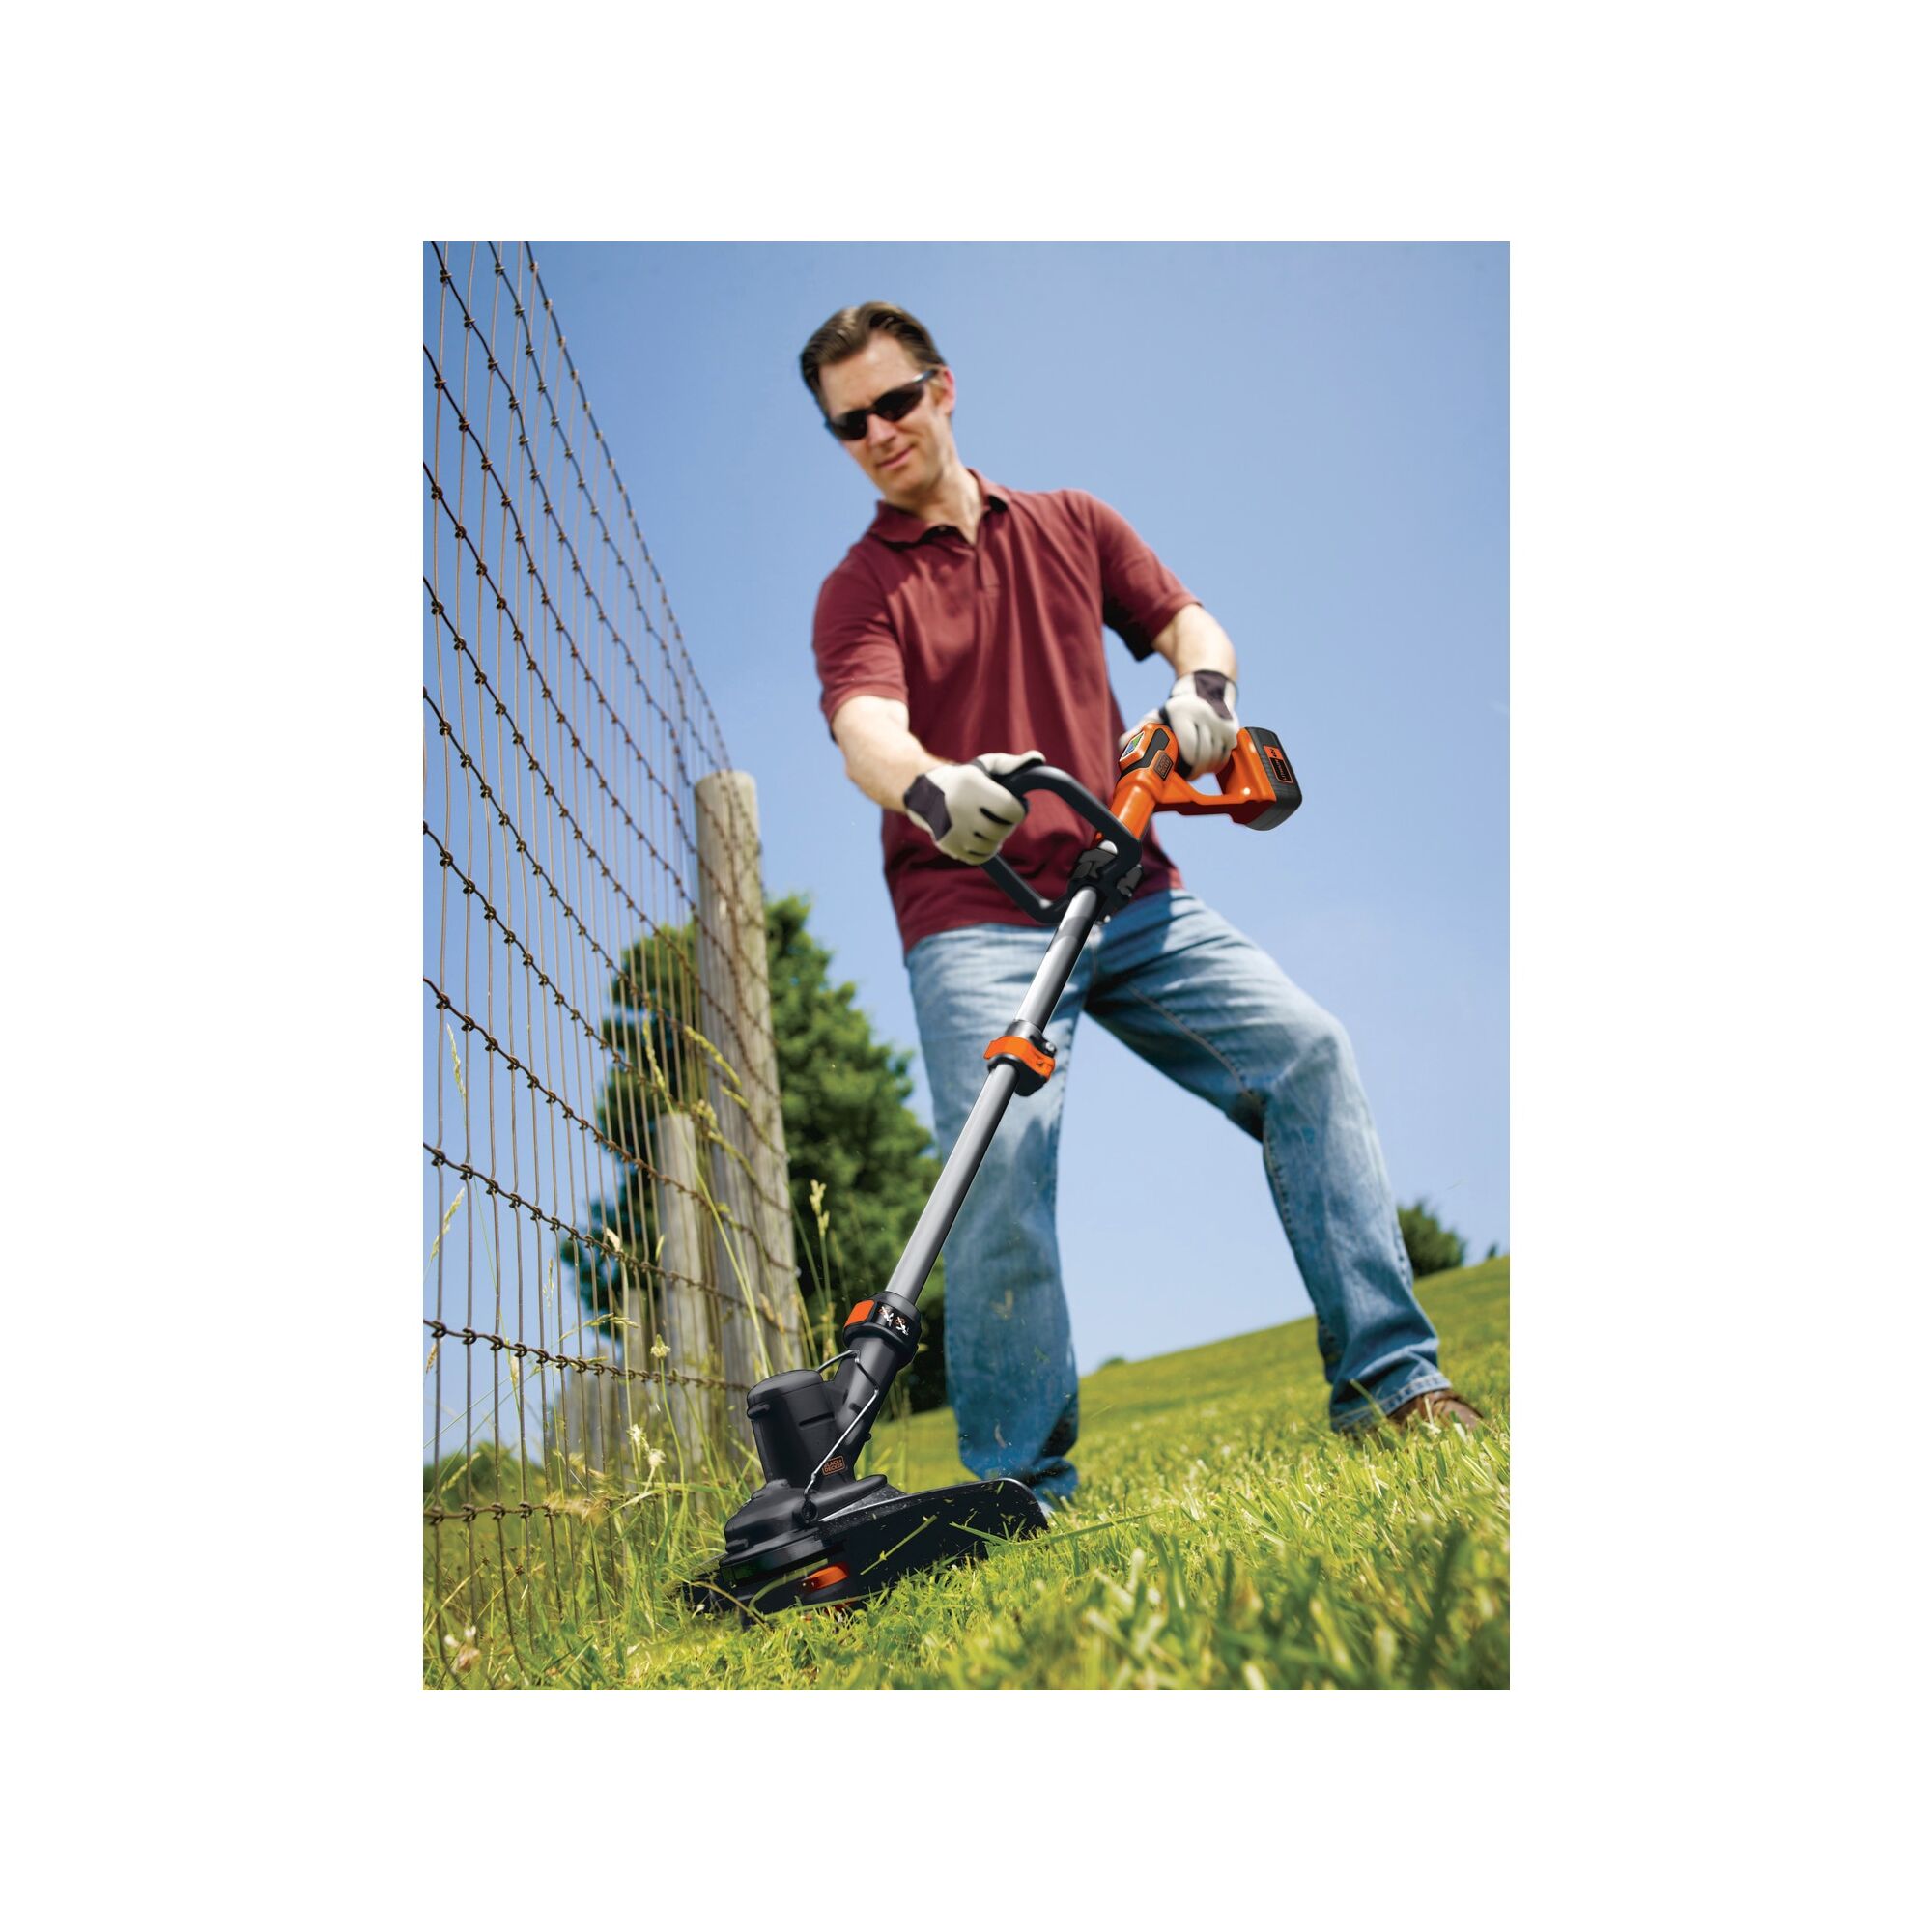 Man using string trimmer near a wire fence